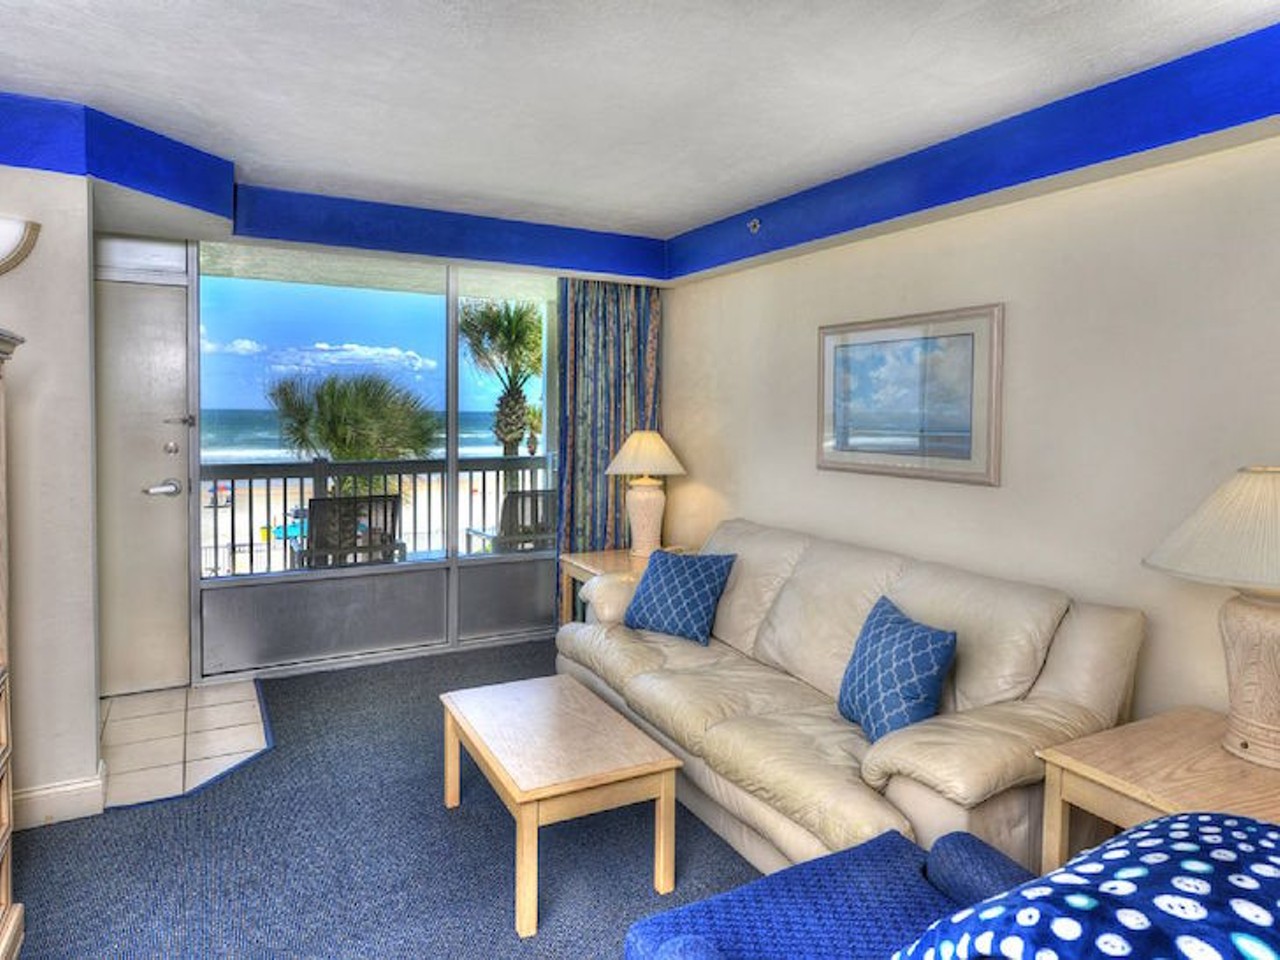  Take a vacation at the Daytona Beach Resort
Average night $134 
1 bedroom 
If you're anti-social and don't want to hang with your friends on the patio, you can crash on the sofa sleeper and watch TV.